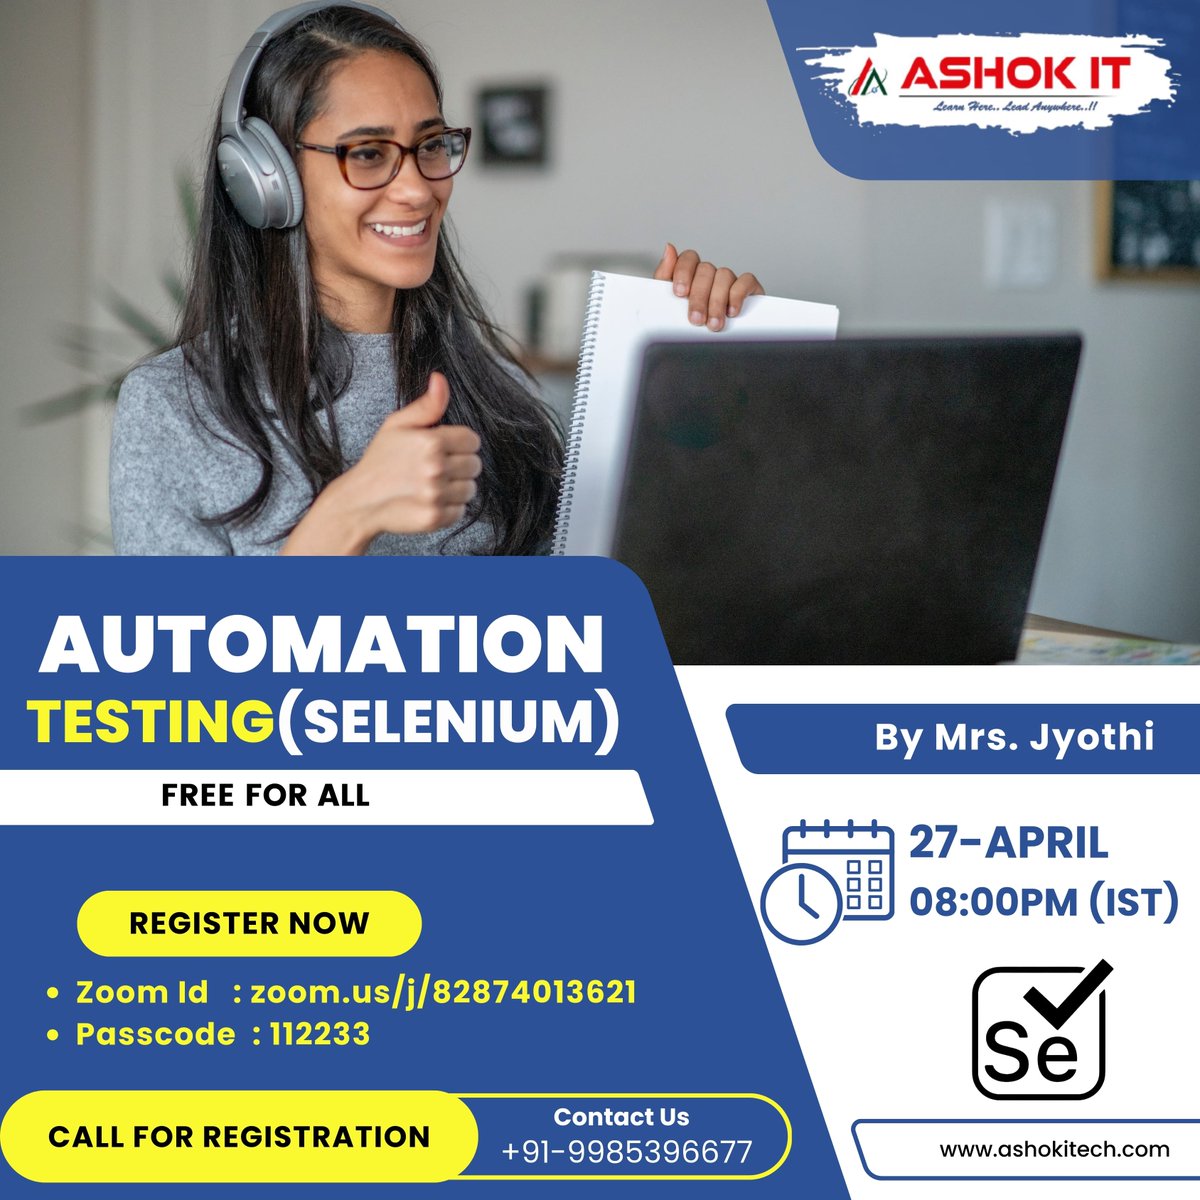 🛑 [Free Work Shop] Automation Testing [Selenium] 🛑
✍️ Enroll Now : bit.ly/3Wfj6nr
👉 Free Online Workshop On 27th - April @ 08:00 PM IST
👉 Join Our WhatsApp Channel : bit.ly/49wCWje

#Selenium #SeleniumWebDriver #AutomationTesting #WebAutomation